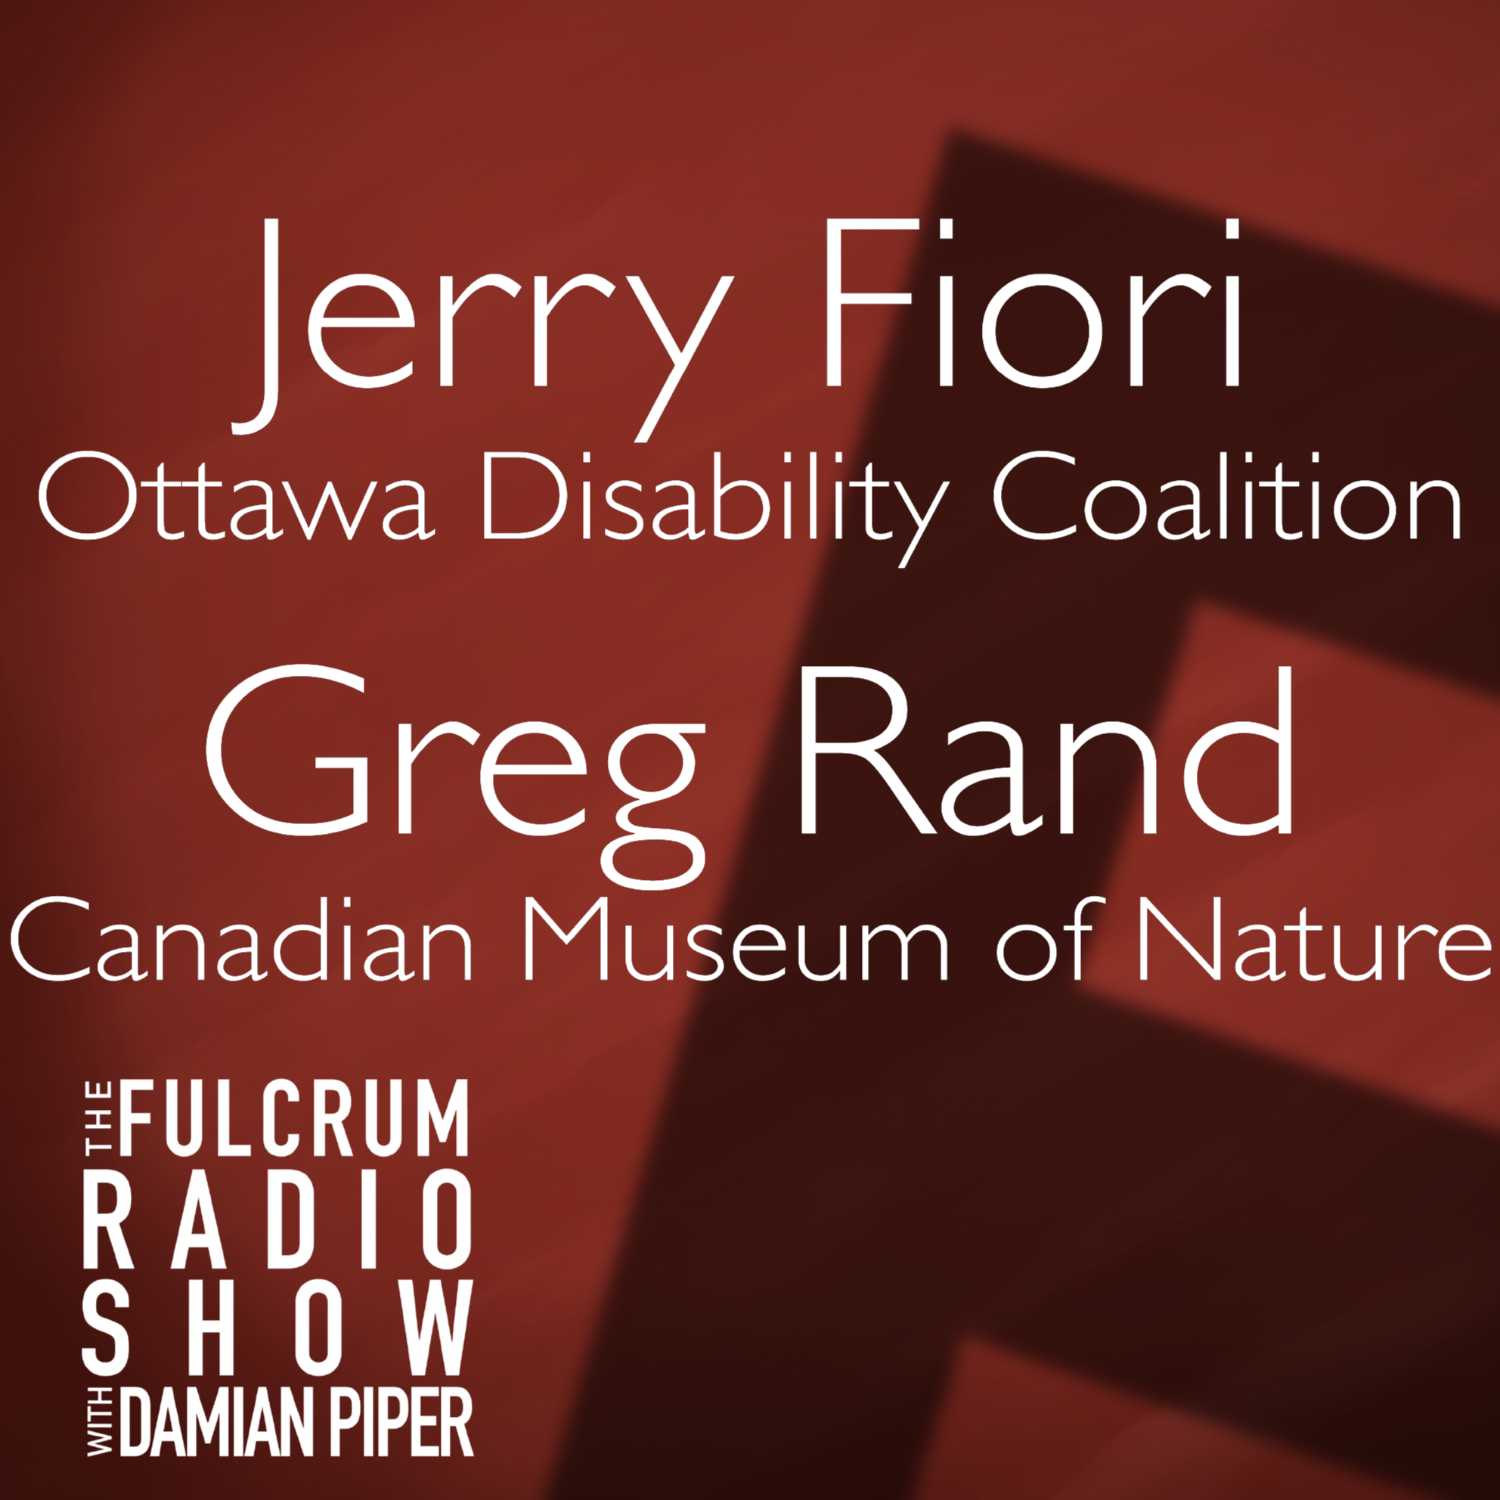 Episode 11: Jerry Fiori, Ottawa Disability Coalition; and Greg Rand, of The Canadian Museum of Nature